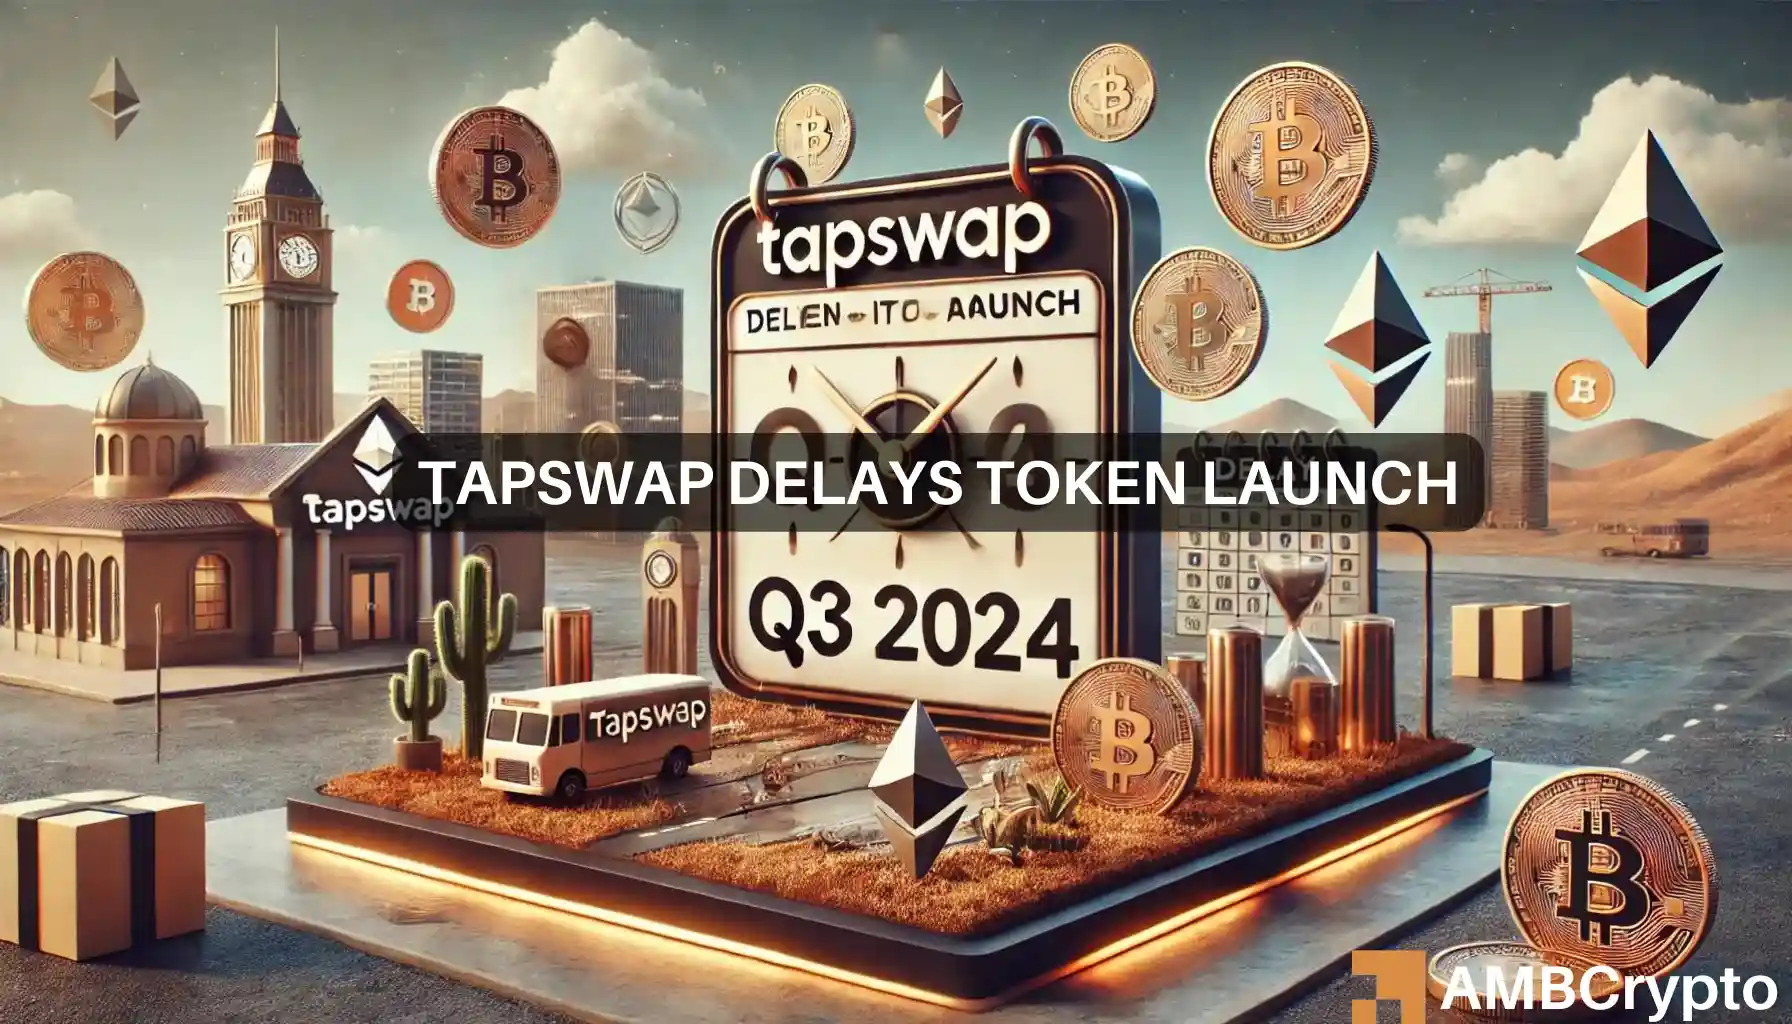 TapSwap token launch, airdrop delayed to Q3 2024: What’s going on?